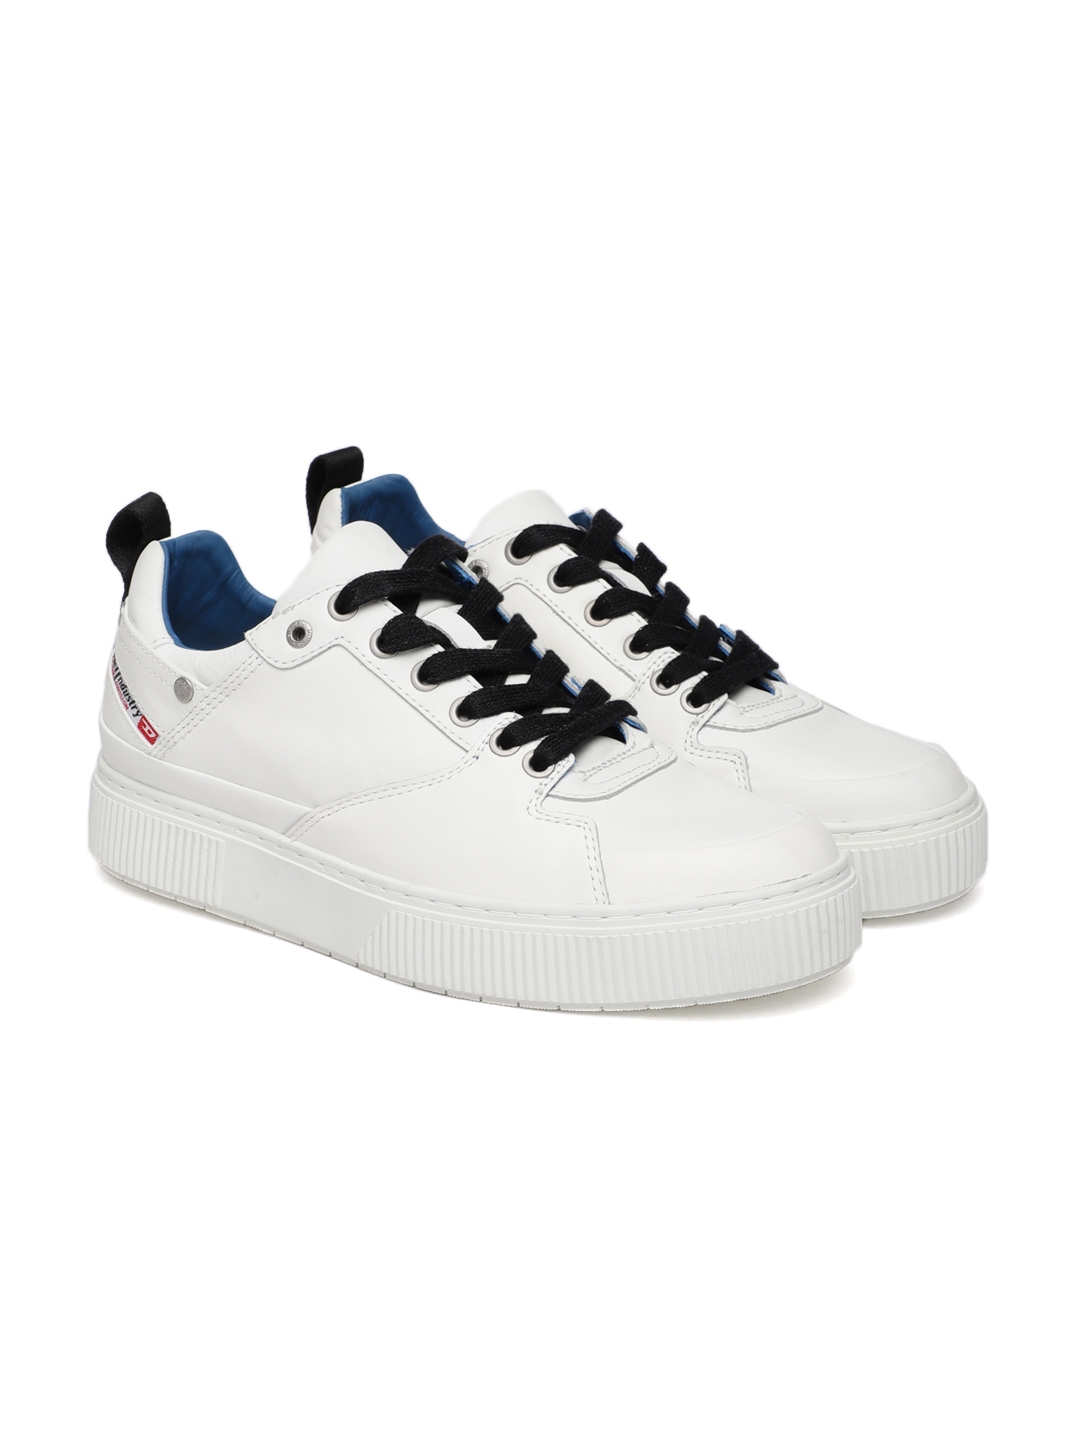 diesel shoes white